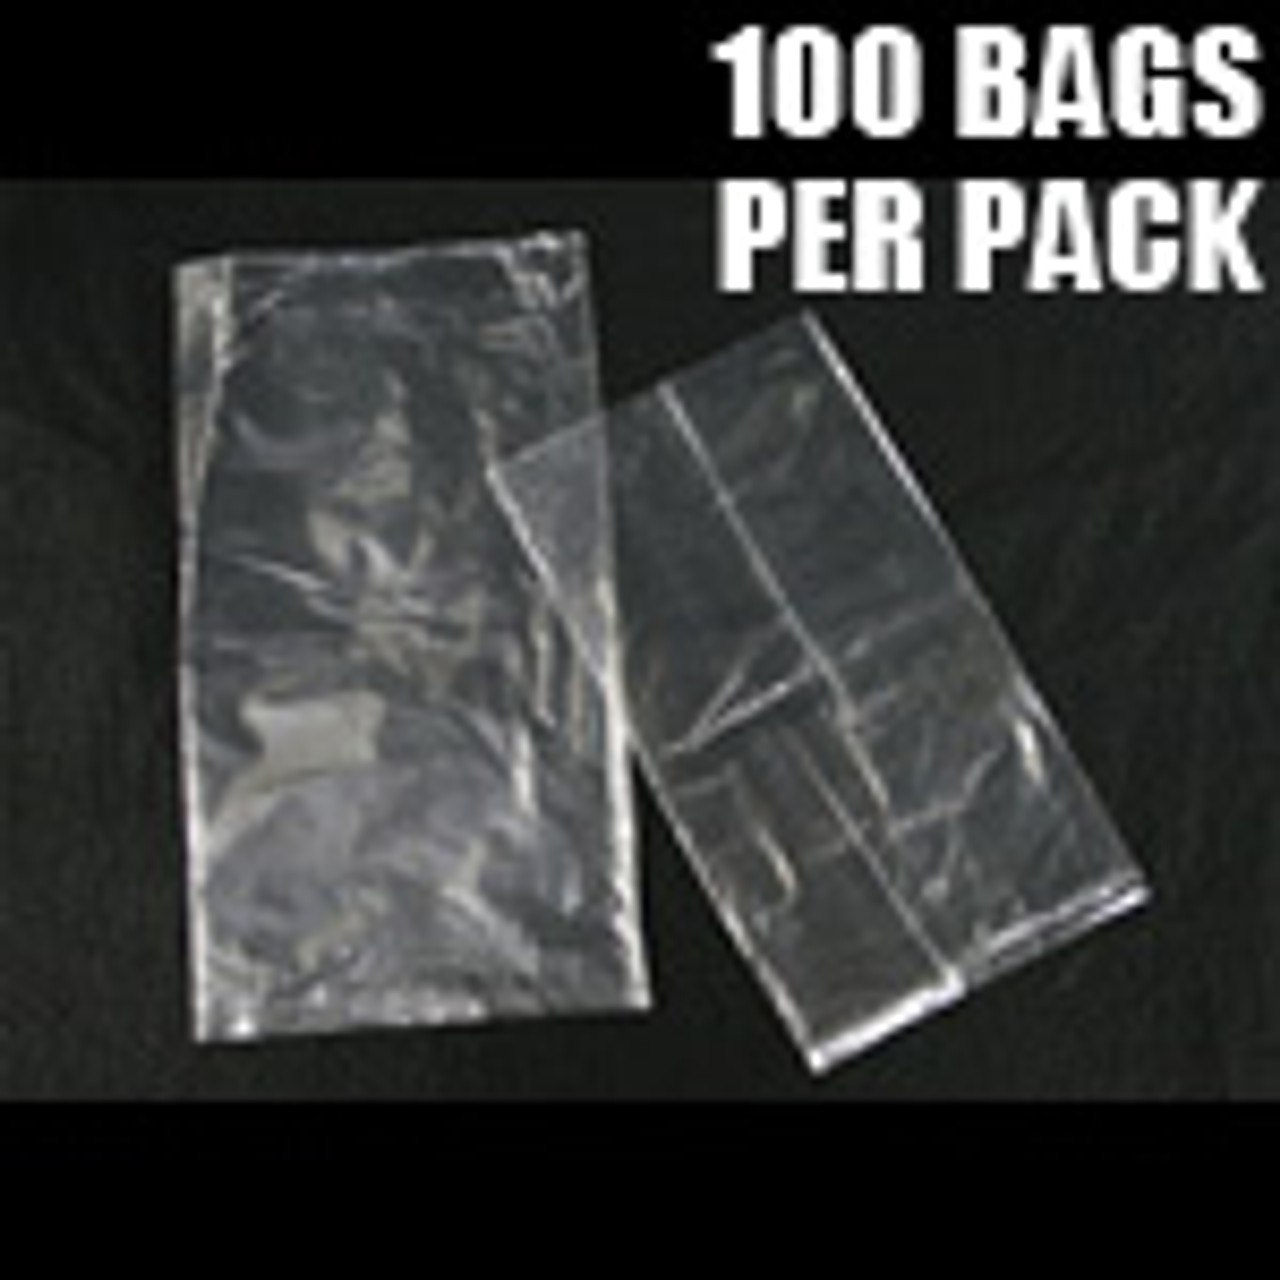 12"x18" Clear Poly Bags 100 Bag Pack